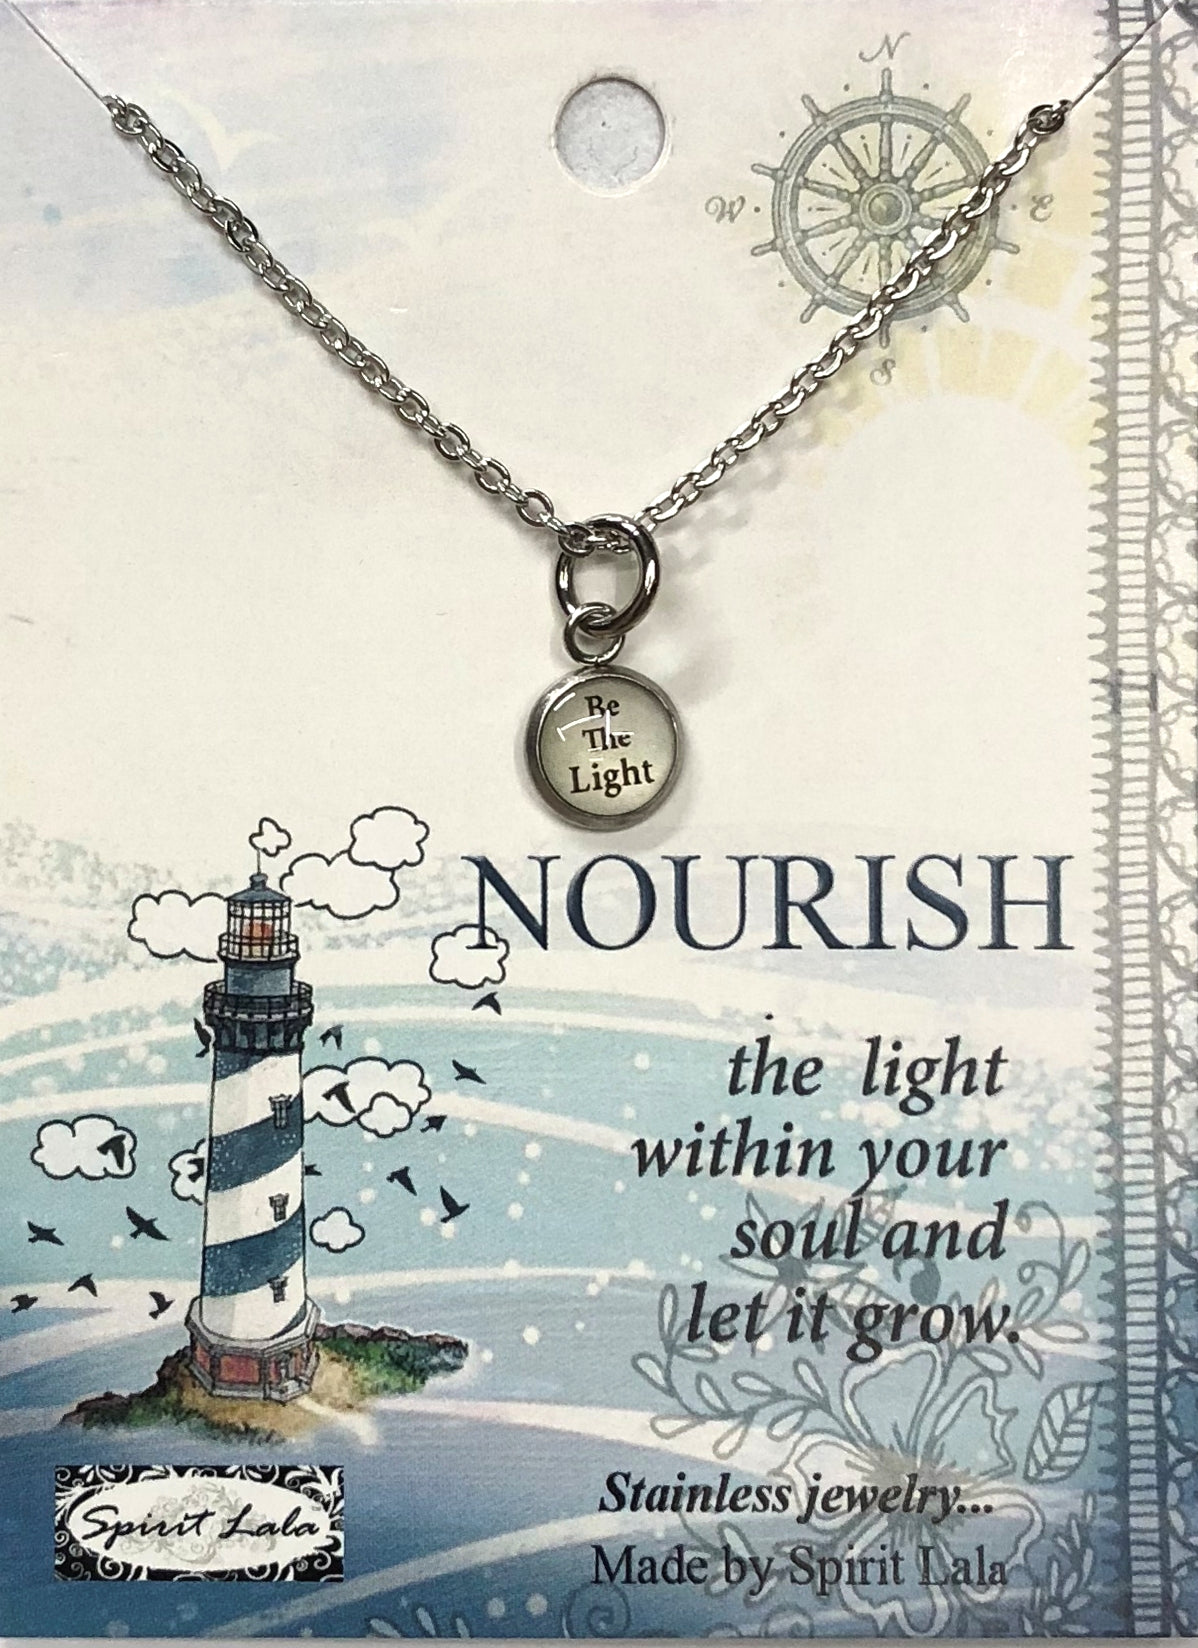 Inspirational Mini Charm Necklace with 18-in Stainless Chain - Mellow Monkey